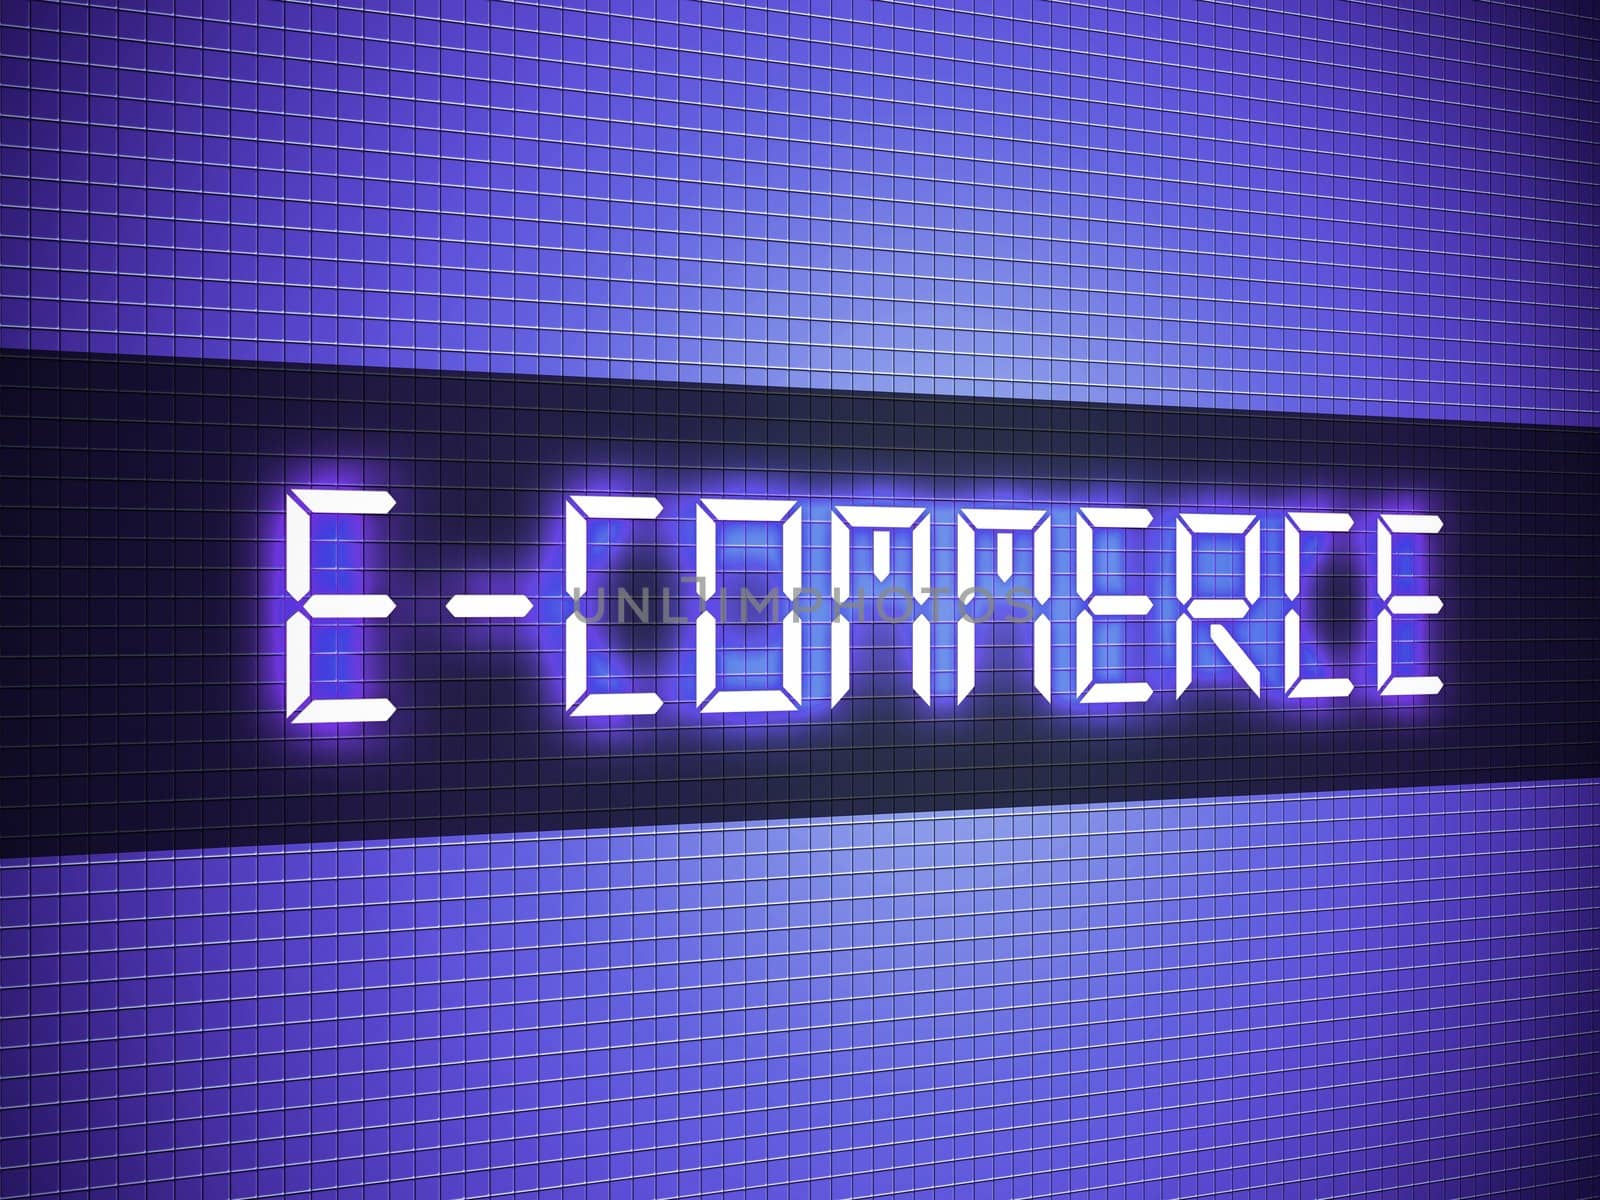 Digital e-commerce word on lcd-styled display